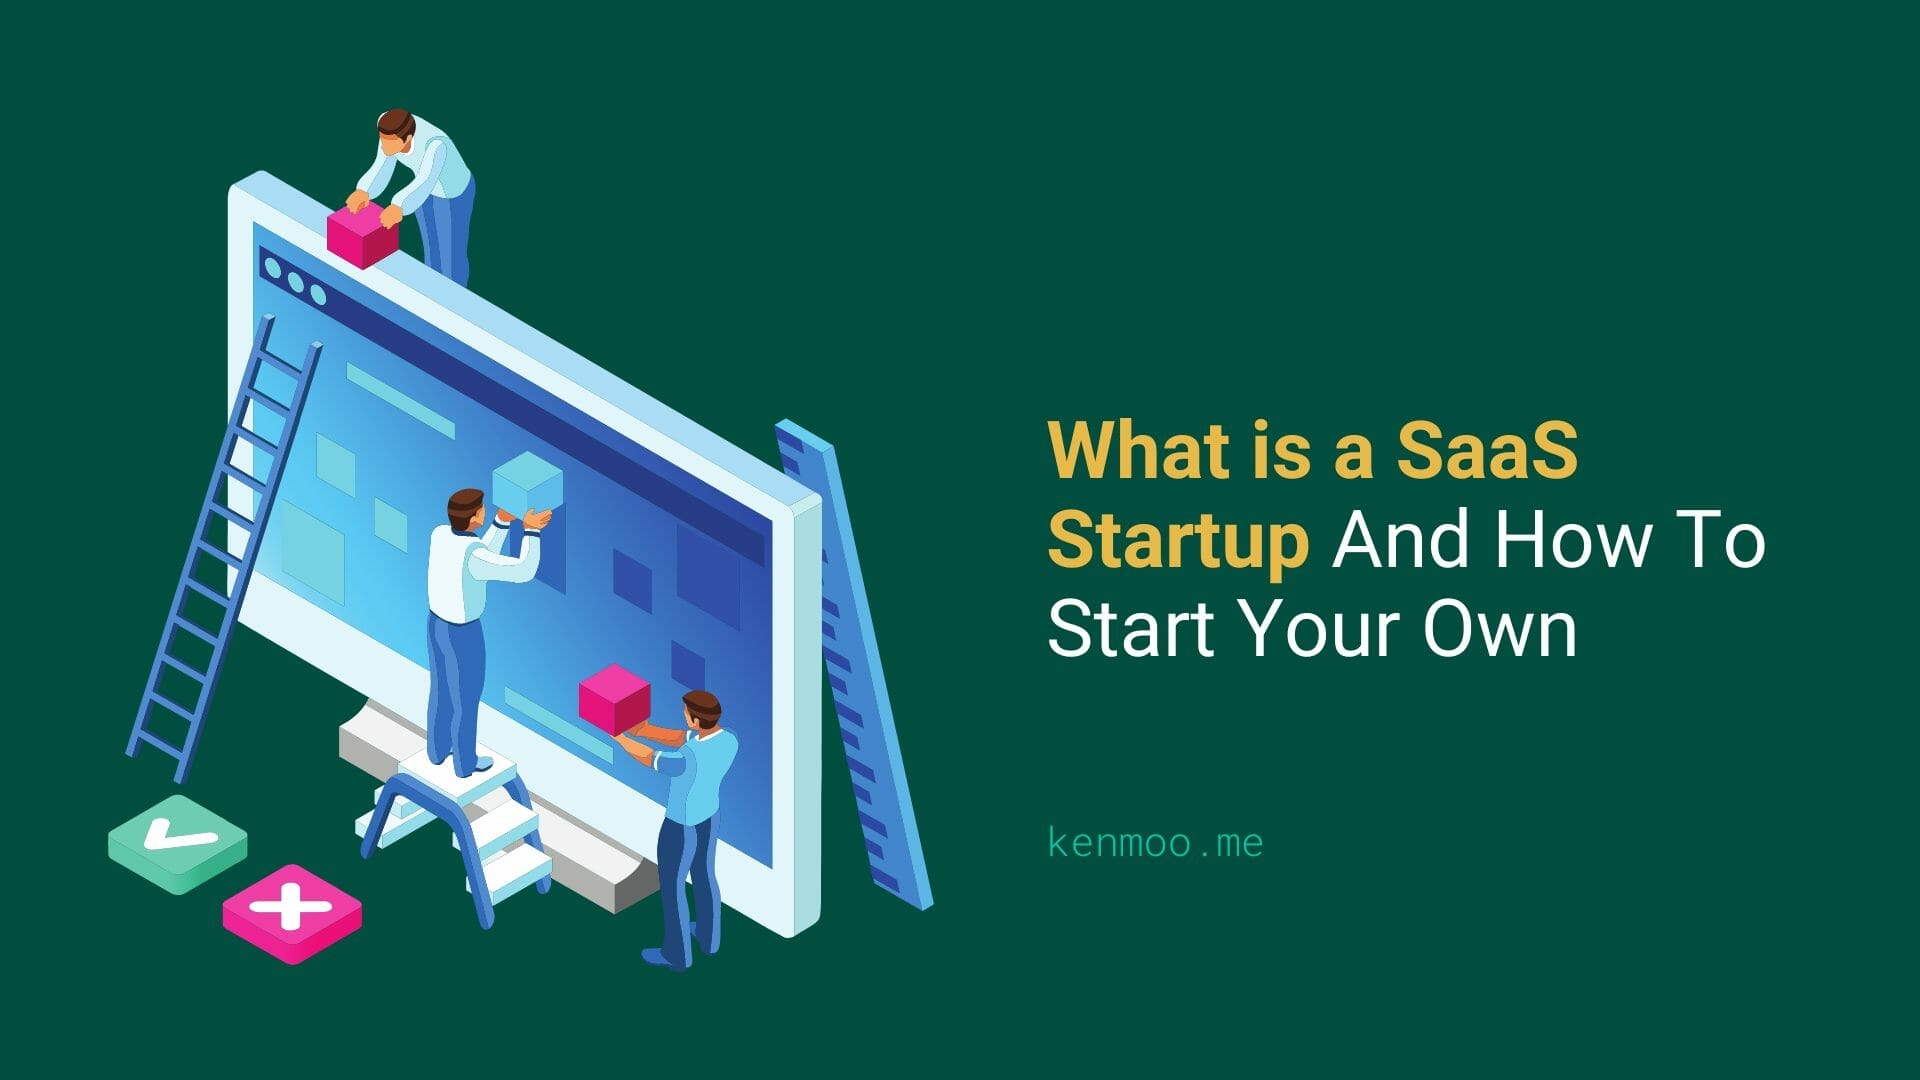 What Is a SaaS Startup And How To Start Your Own